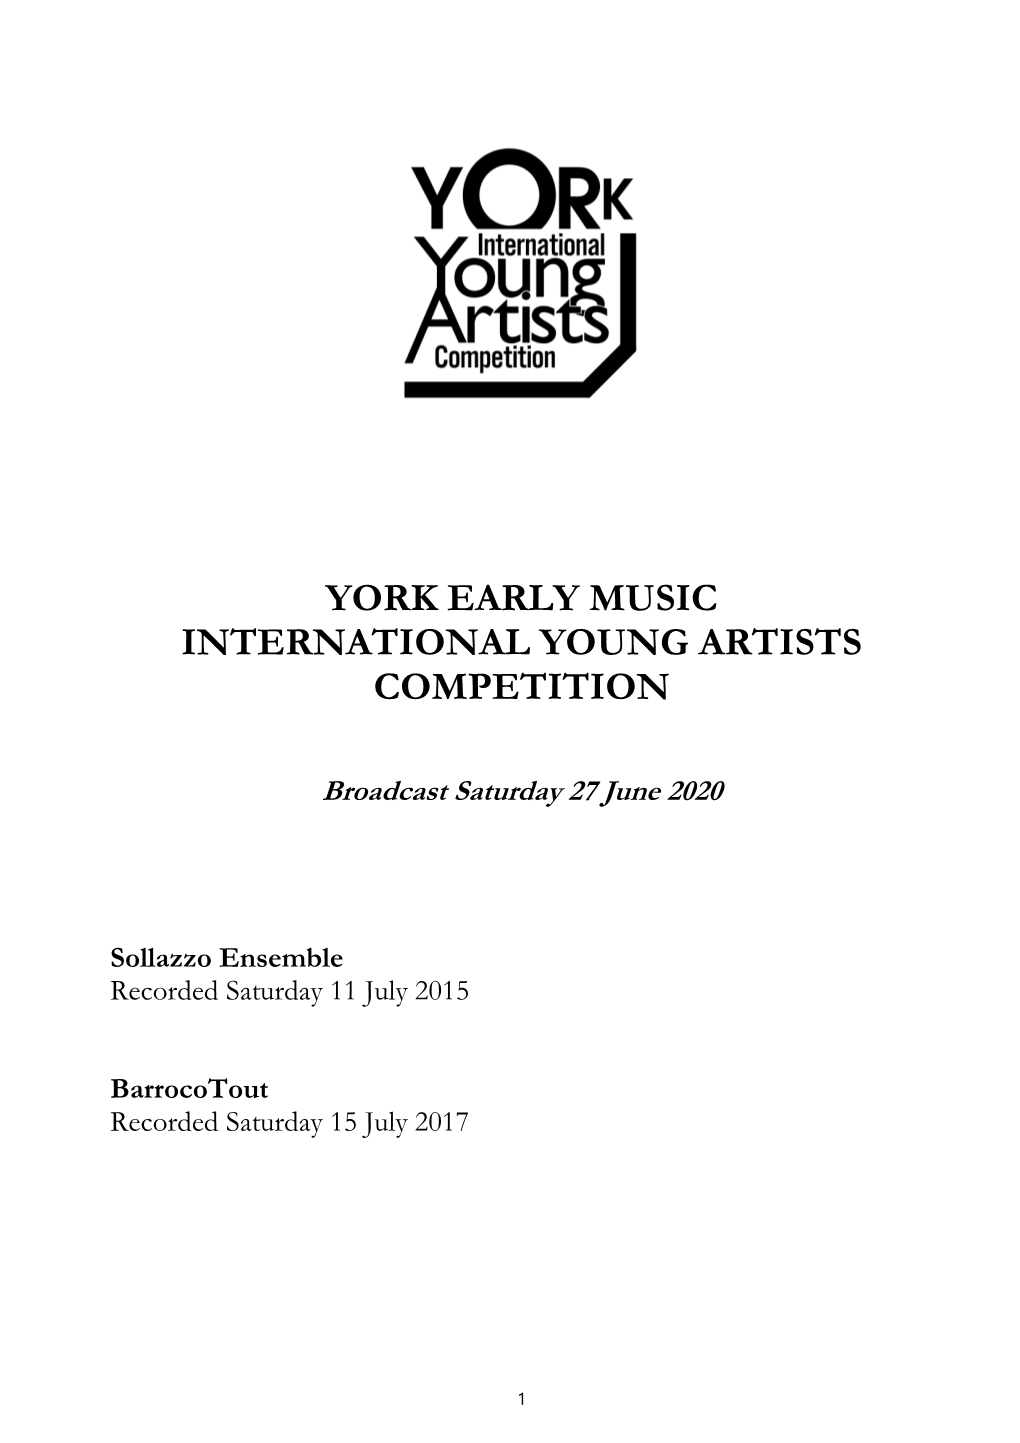 York Early Music International Young Artists Competition